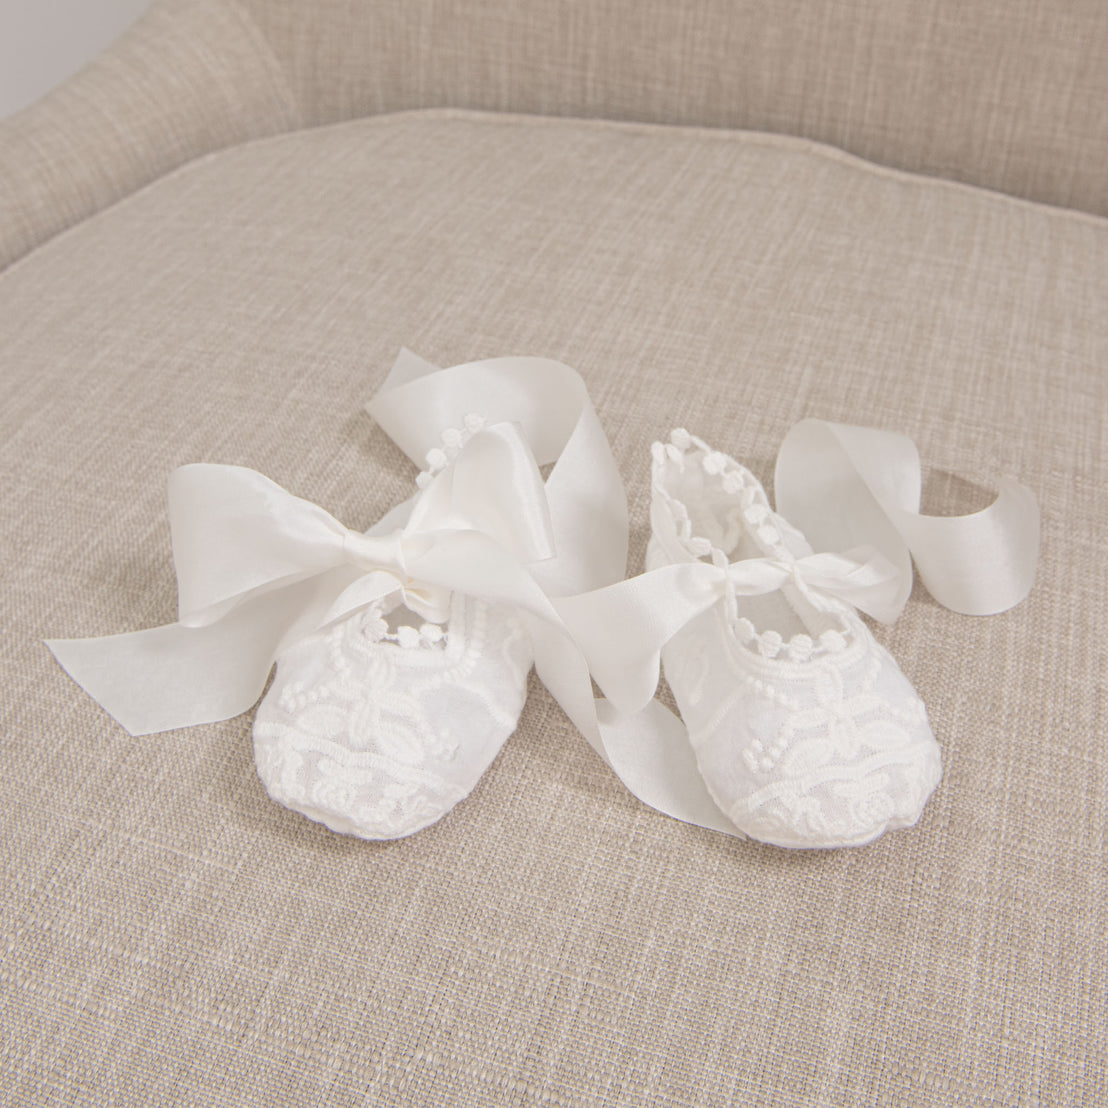 Flat lay of Lily Booties showing the details of the soft cotton lace in light ivory with silk ribbon ties